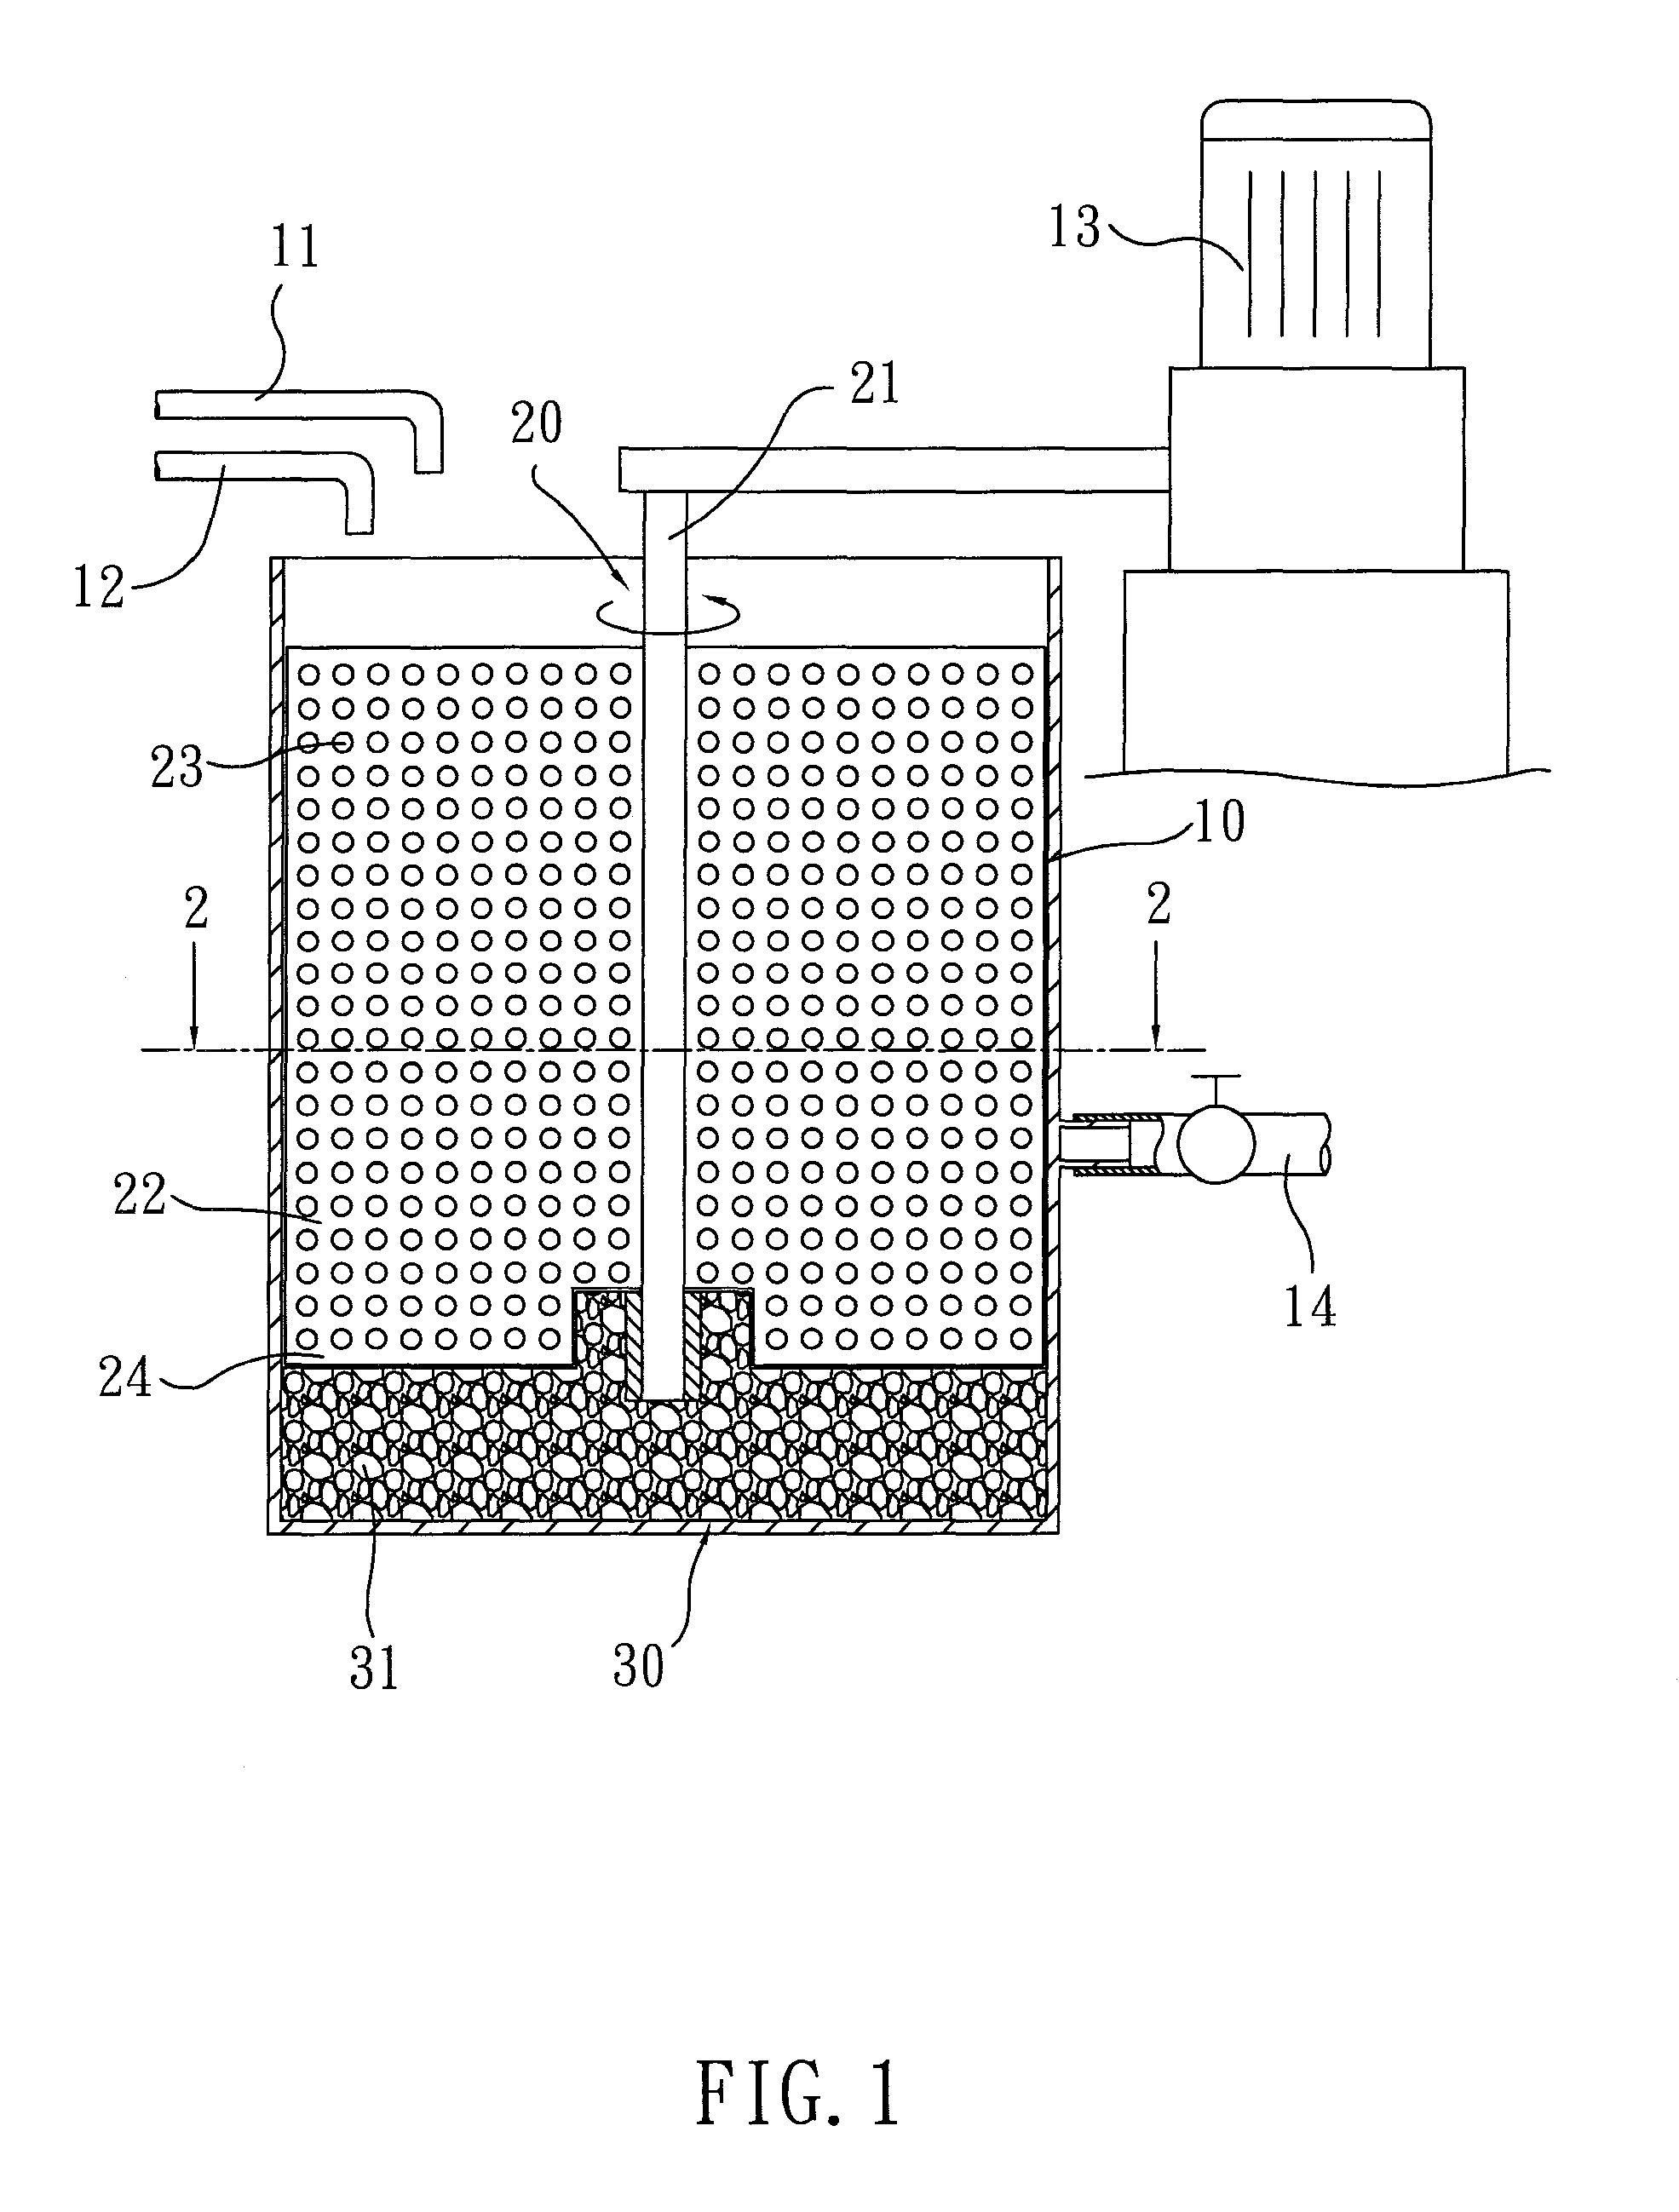 Stirring, emulsifying and small molecule clustering apparatus for producing oil-water fuel